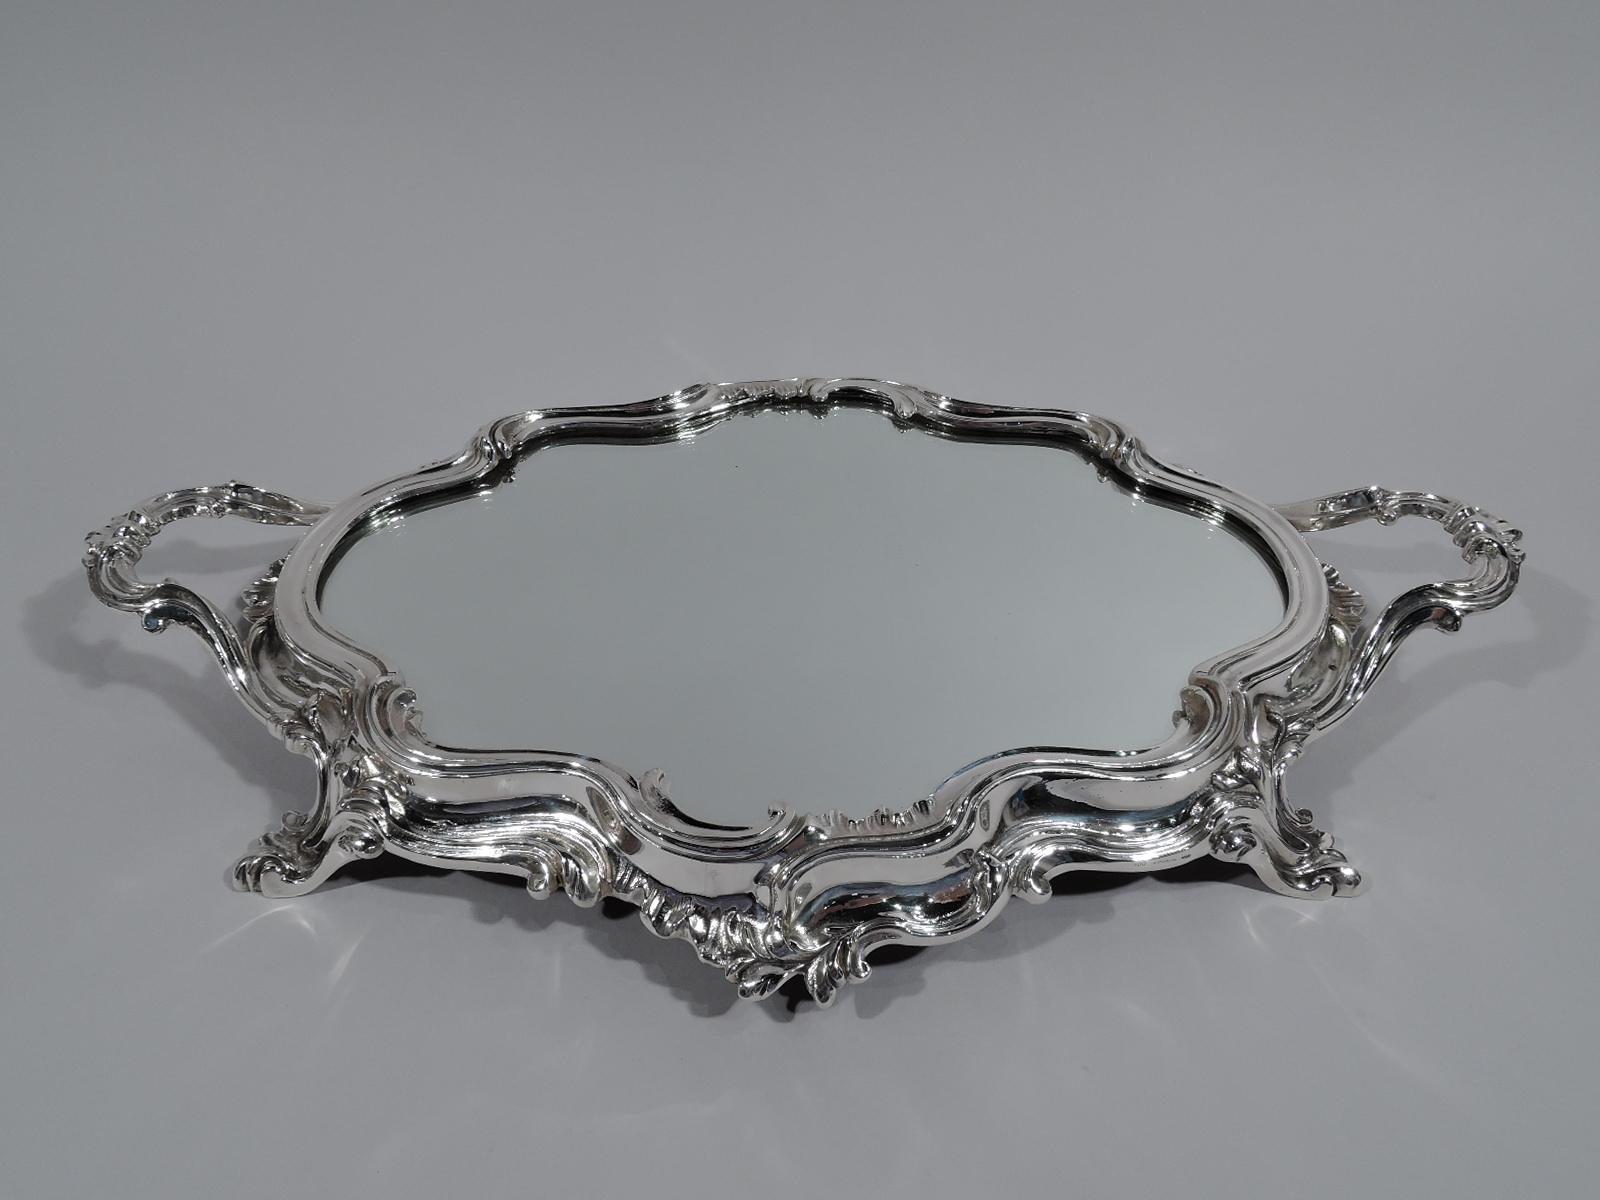 German Rococo Revival 900 silver plateau, circa 1950. Shaped oval with fluid scrolls flowing into four supports. Two scrolled-bracket end handles. Well inset with mirror. Underside velvet lined. Fully marked.

Overall dimensions: H 2 1/4 x W 19 x